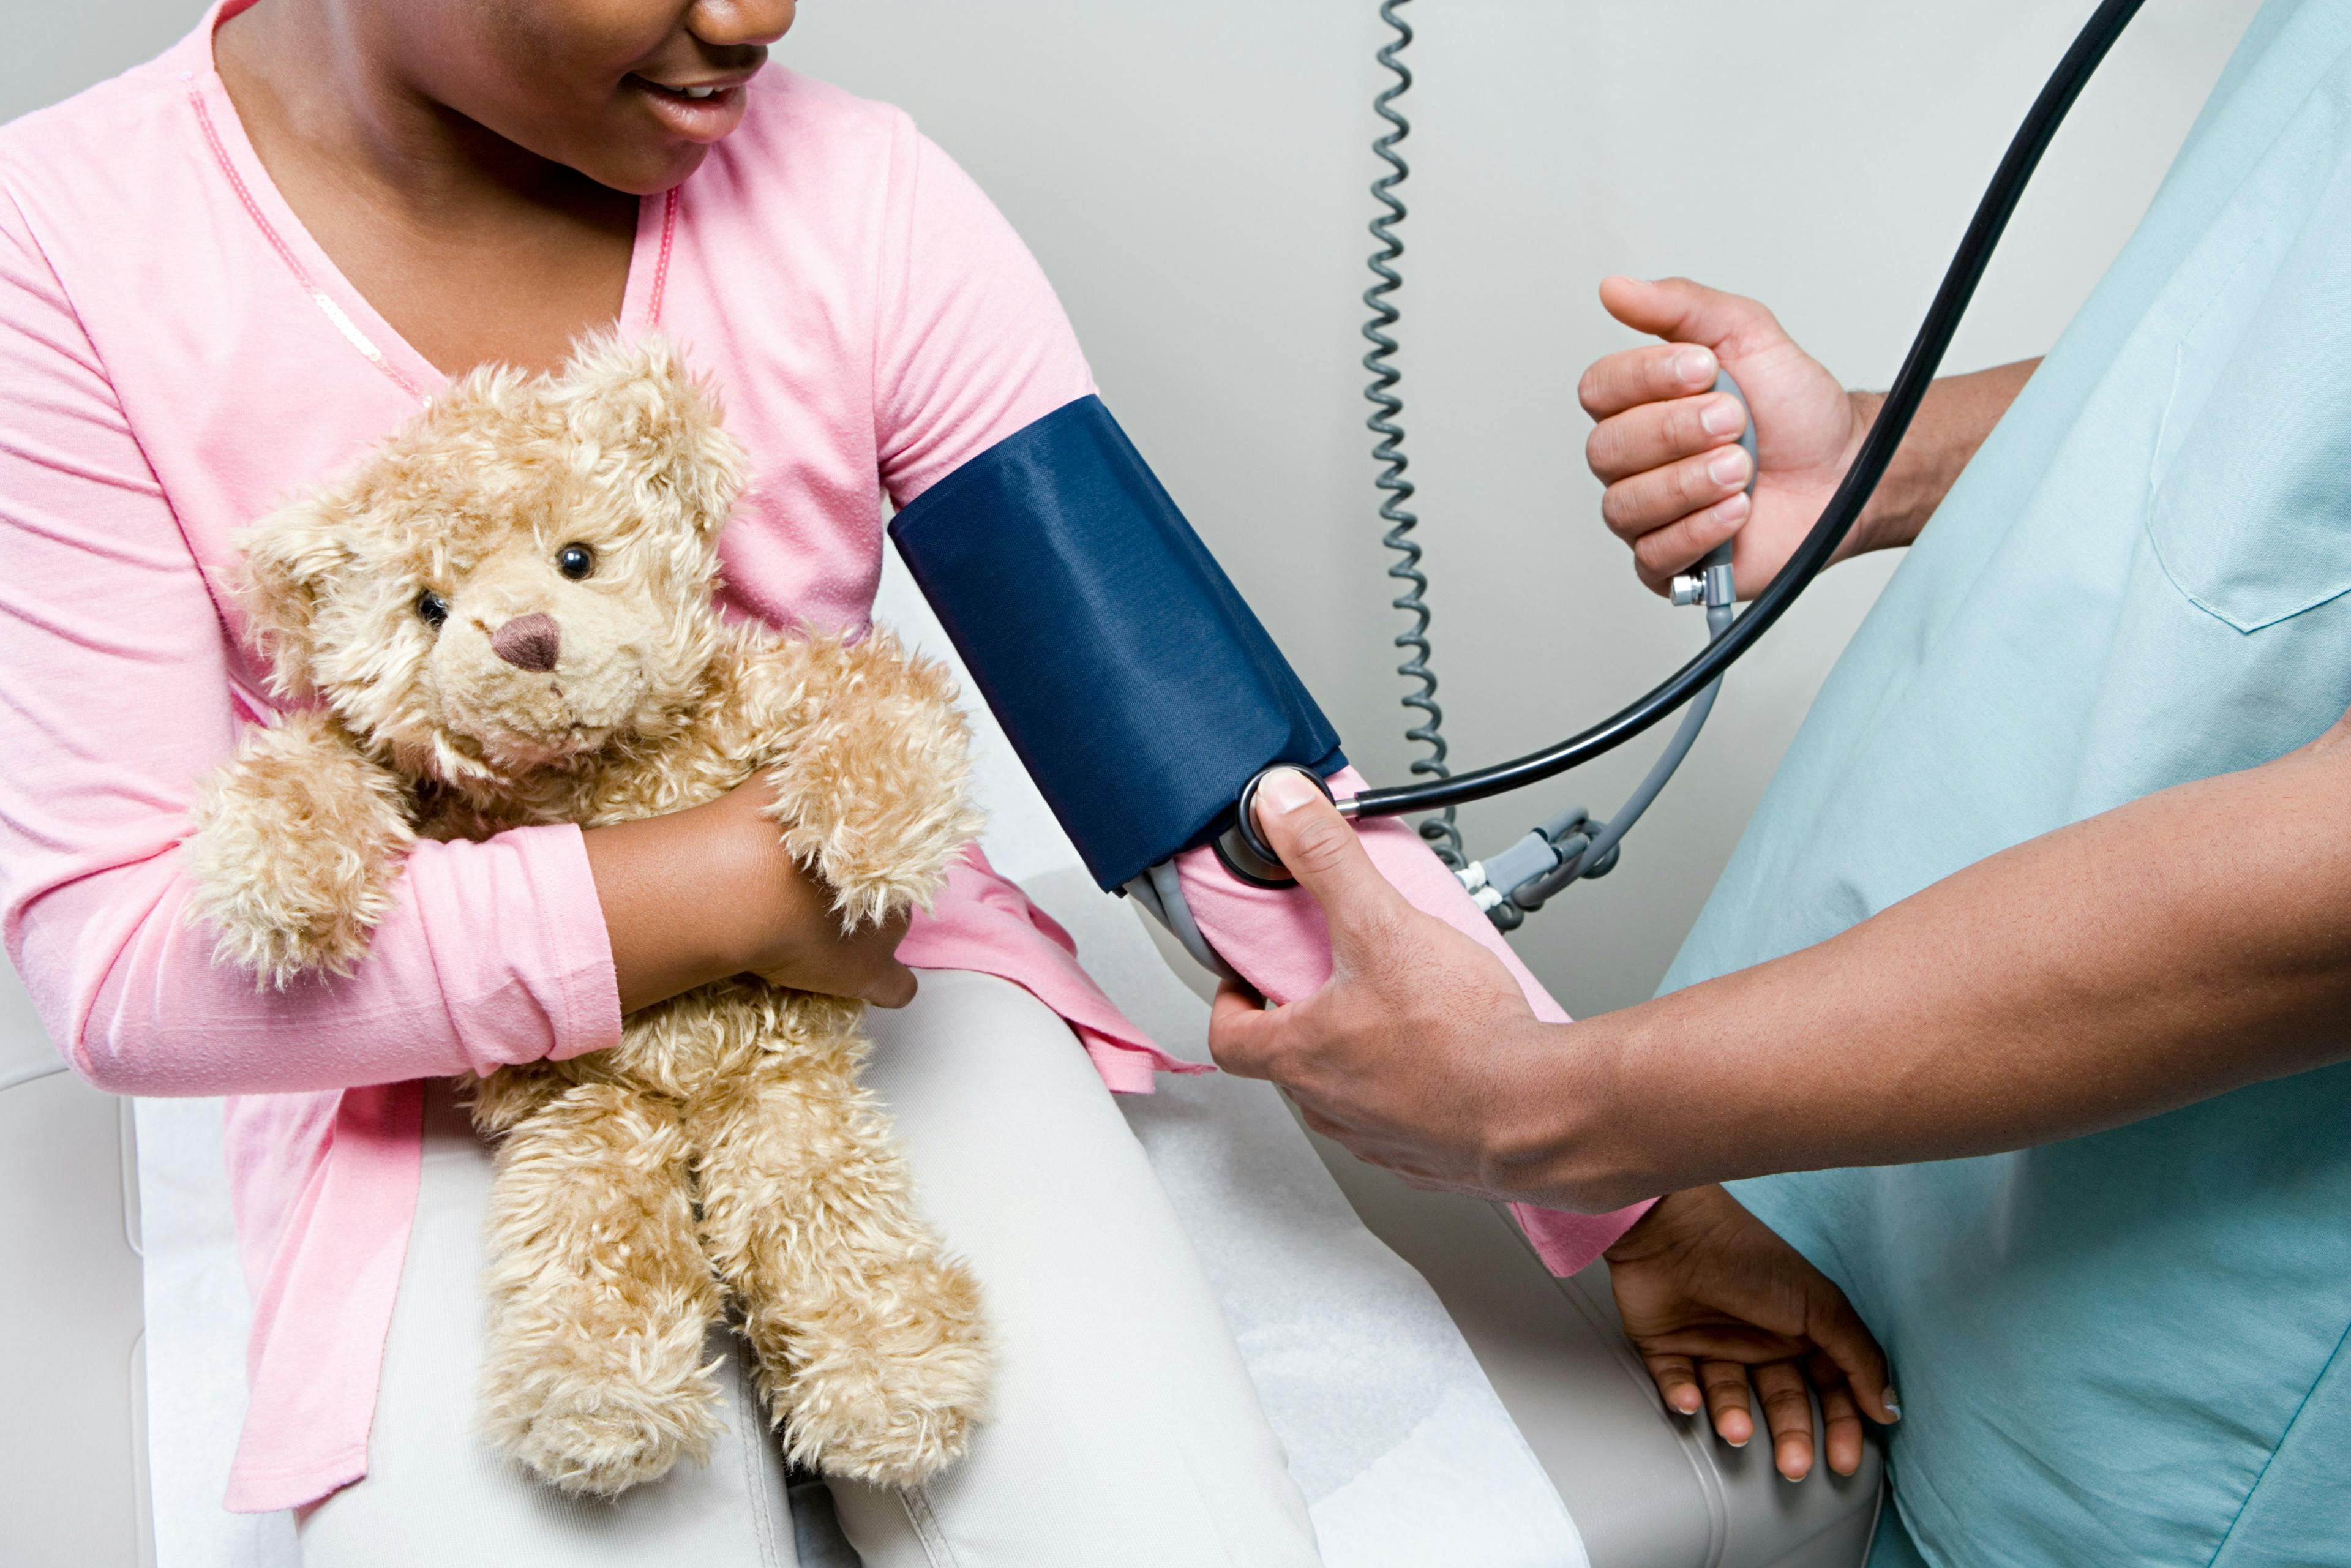 Why aren’t more digital health solutions aimed at children?